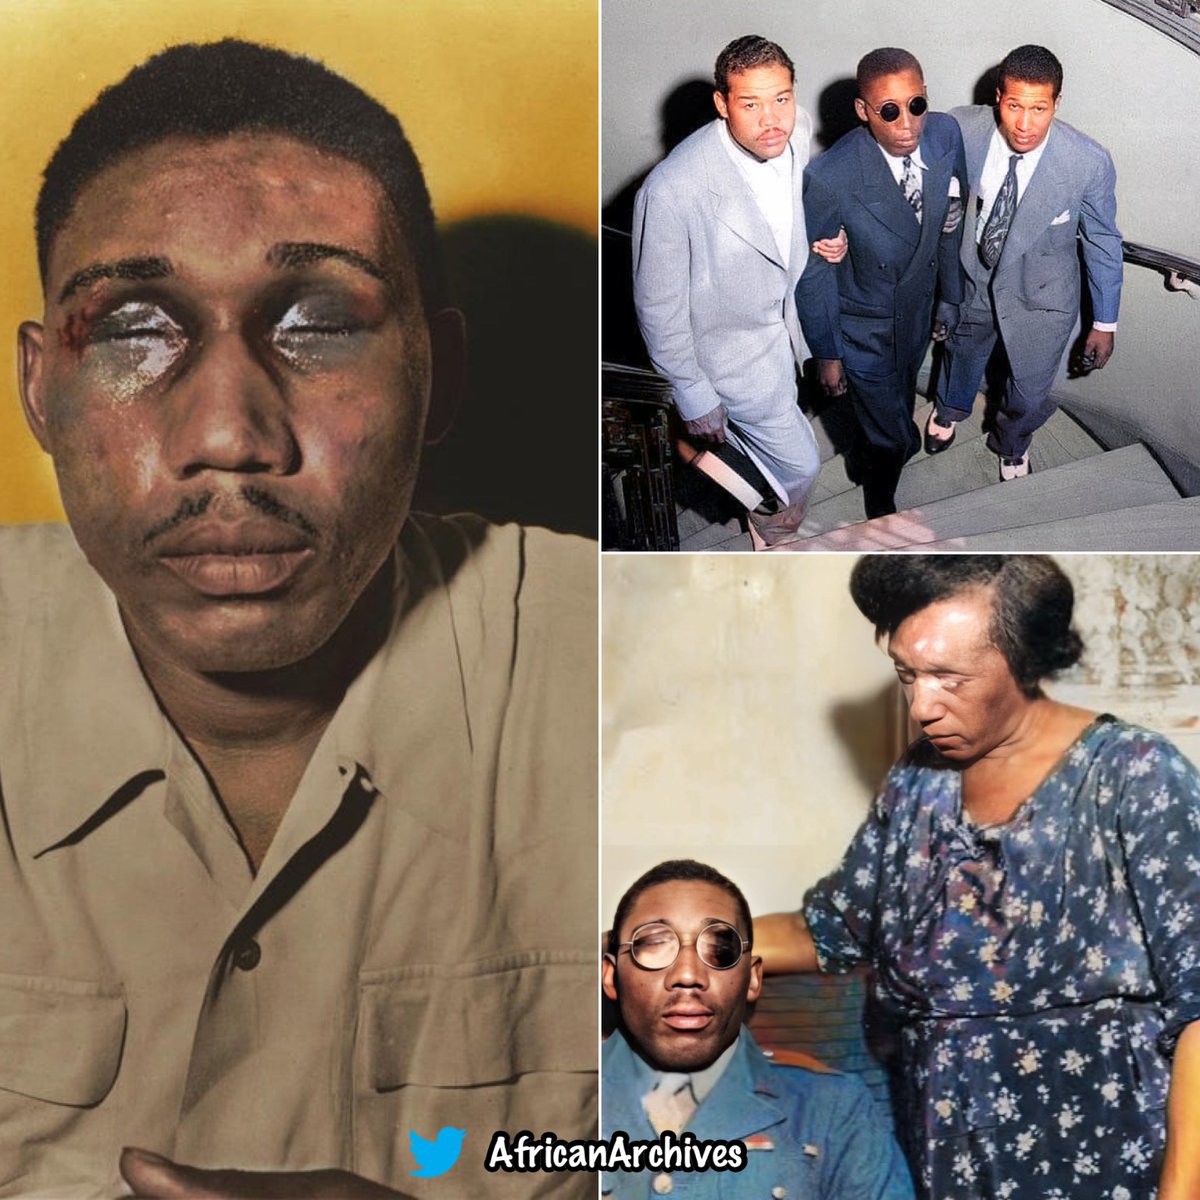 On February 12th 1946, Isaac Woodard, WW2 veteran, hours after being honorably discharged, was attacked by South Carolina police while still in uniform when taking the bus home & left permanently BLIND

The officers were acquitted by an all white jury #BlackHistoryMonth 

THREAD!